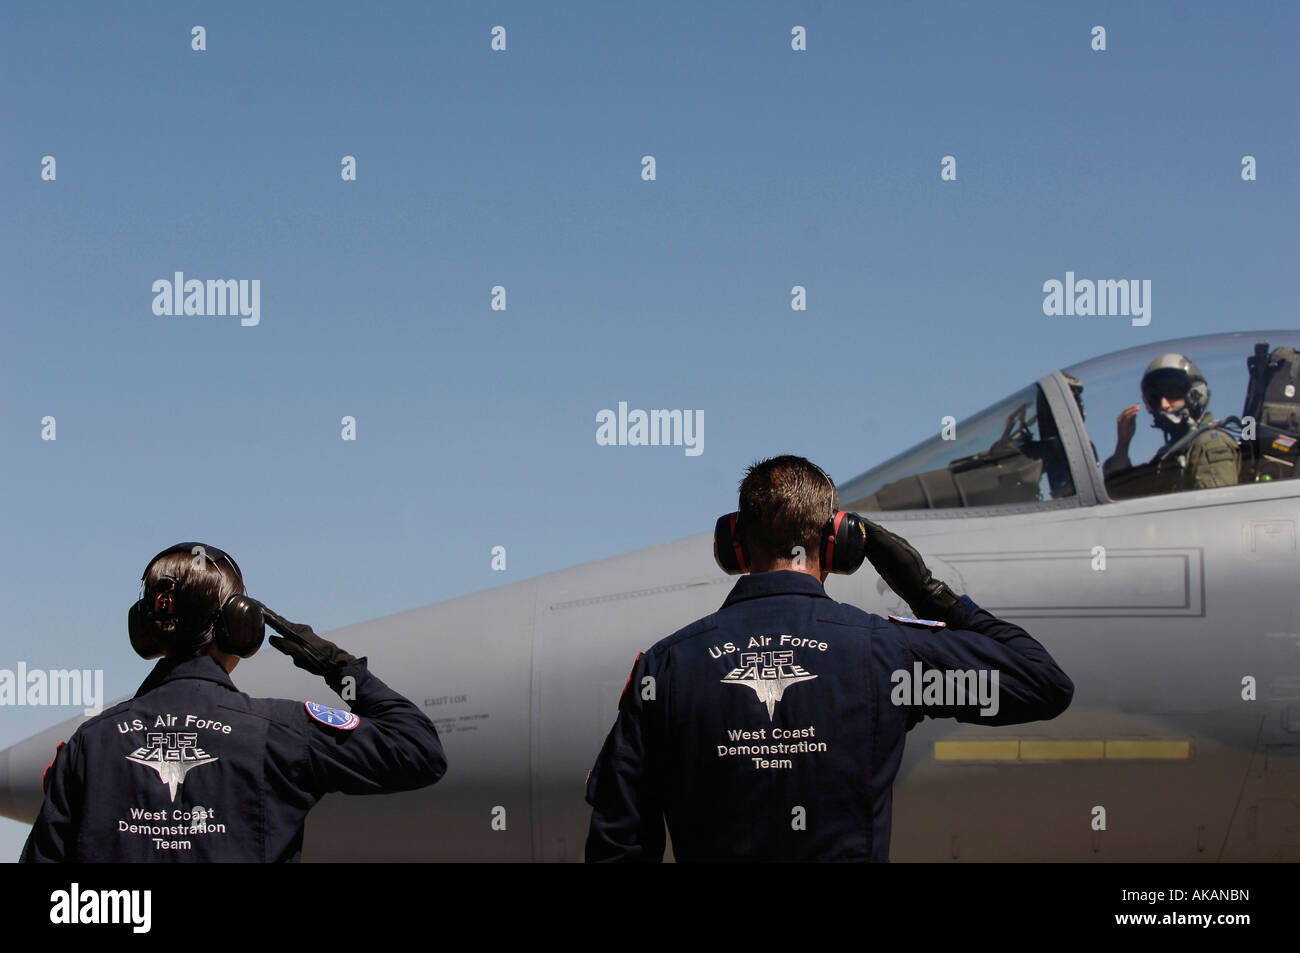 U.S. Air Force Airmen salute the Captain of an F-15 Eagle. Stock Photo